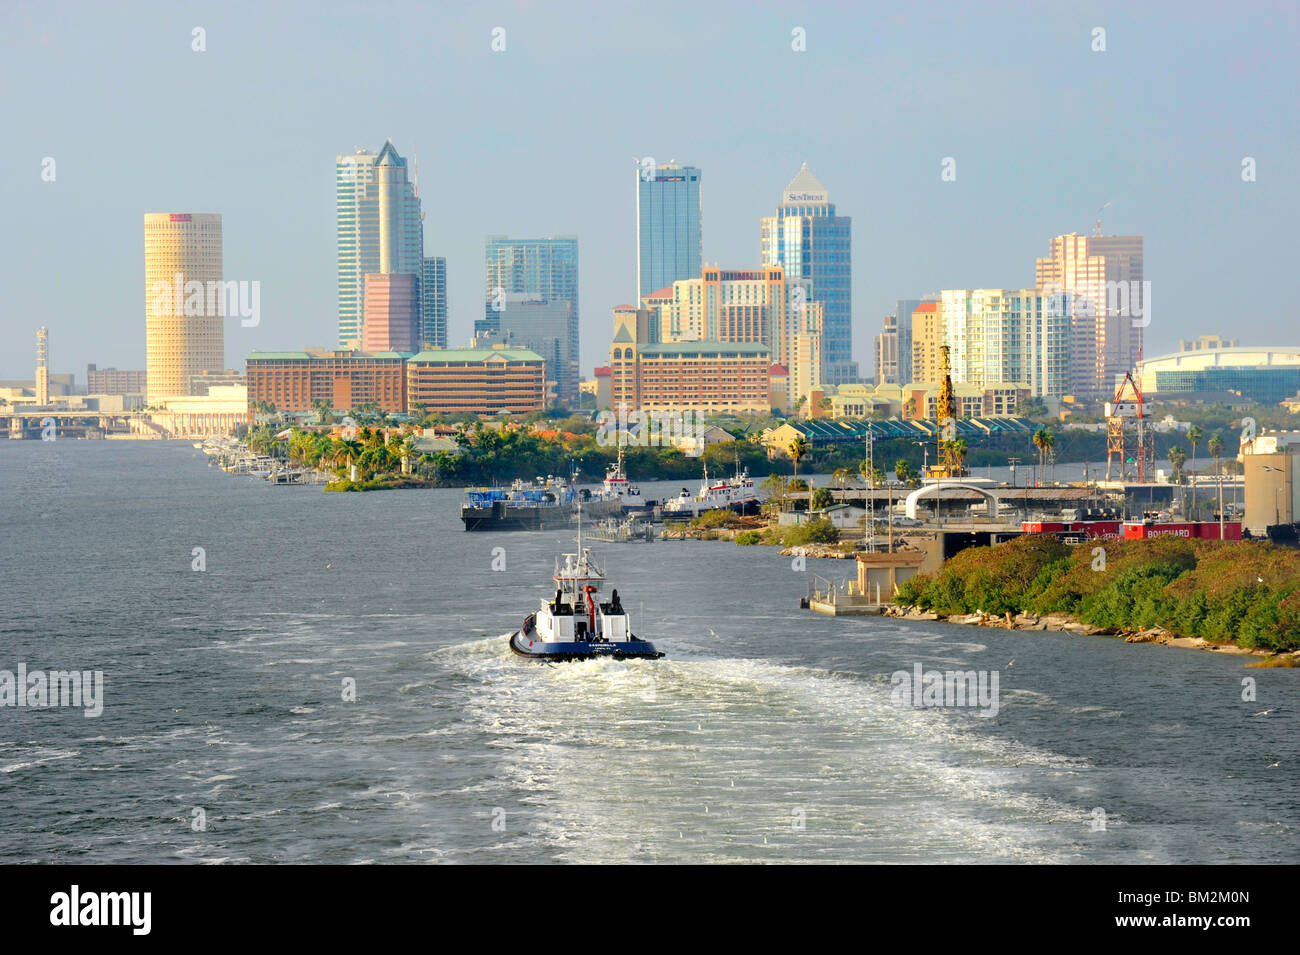 Downtown Tampa Bay Florida Skyline from Cruise Ship Stock Photo